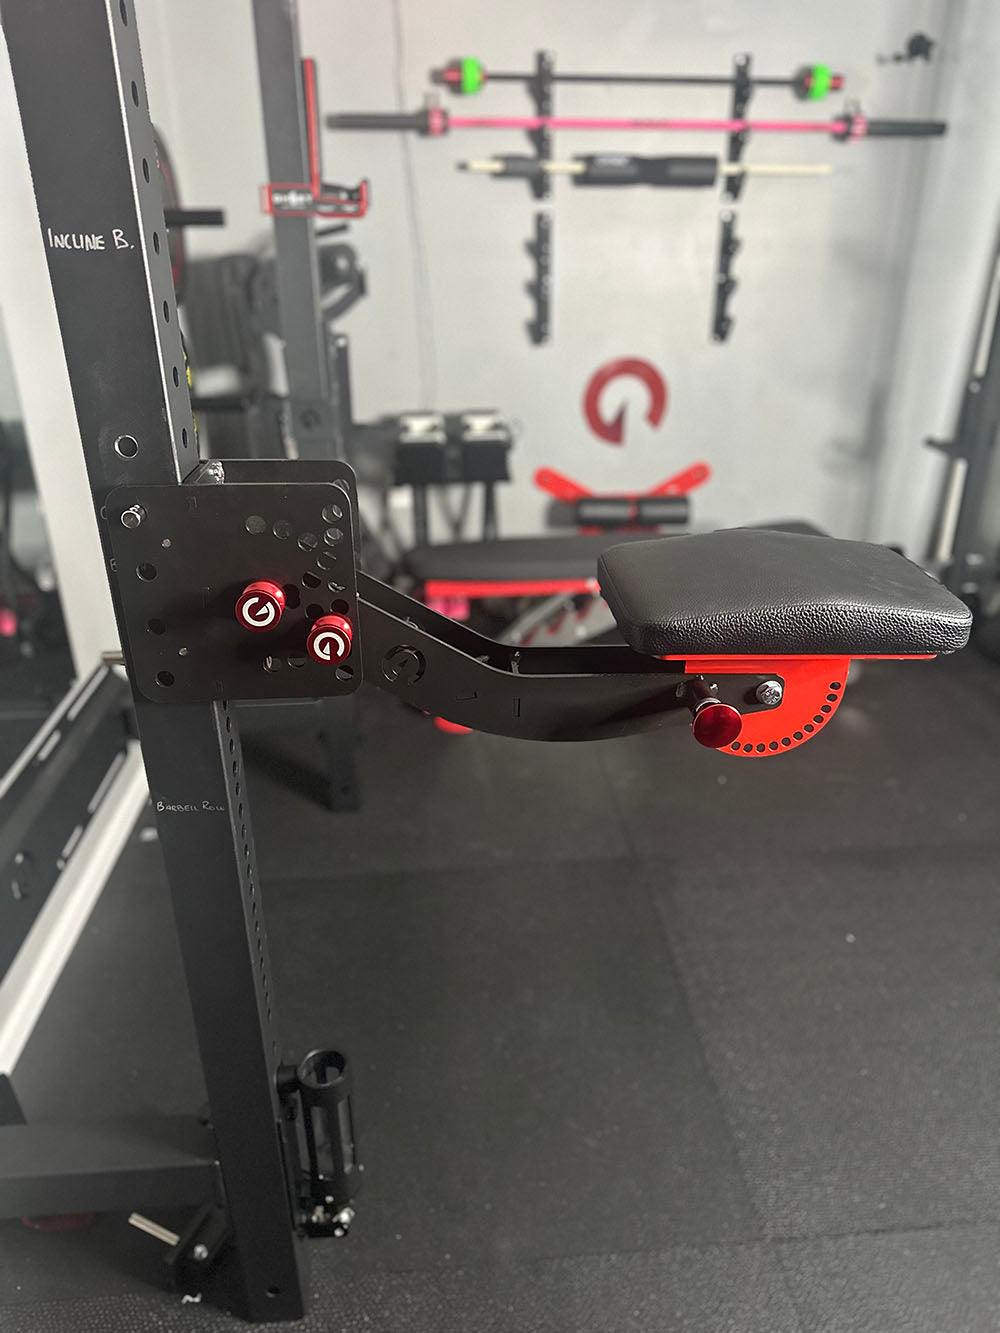 The rack-attaching, Infinity Arm can be utilized for chest-supported, arm-supported, back-supported, head-supported, and many other supported exercises. This image presents the Infinity arm in a home gym attached to a rack.